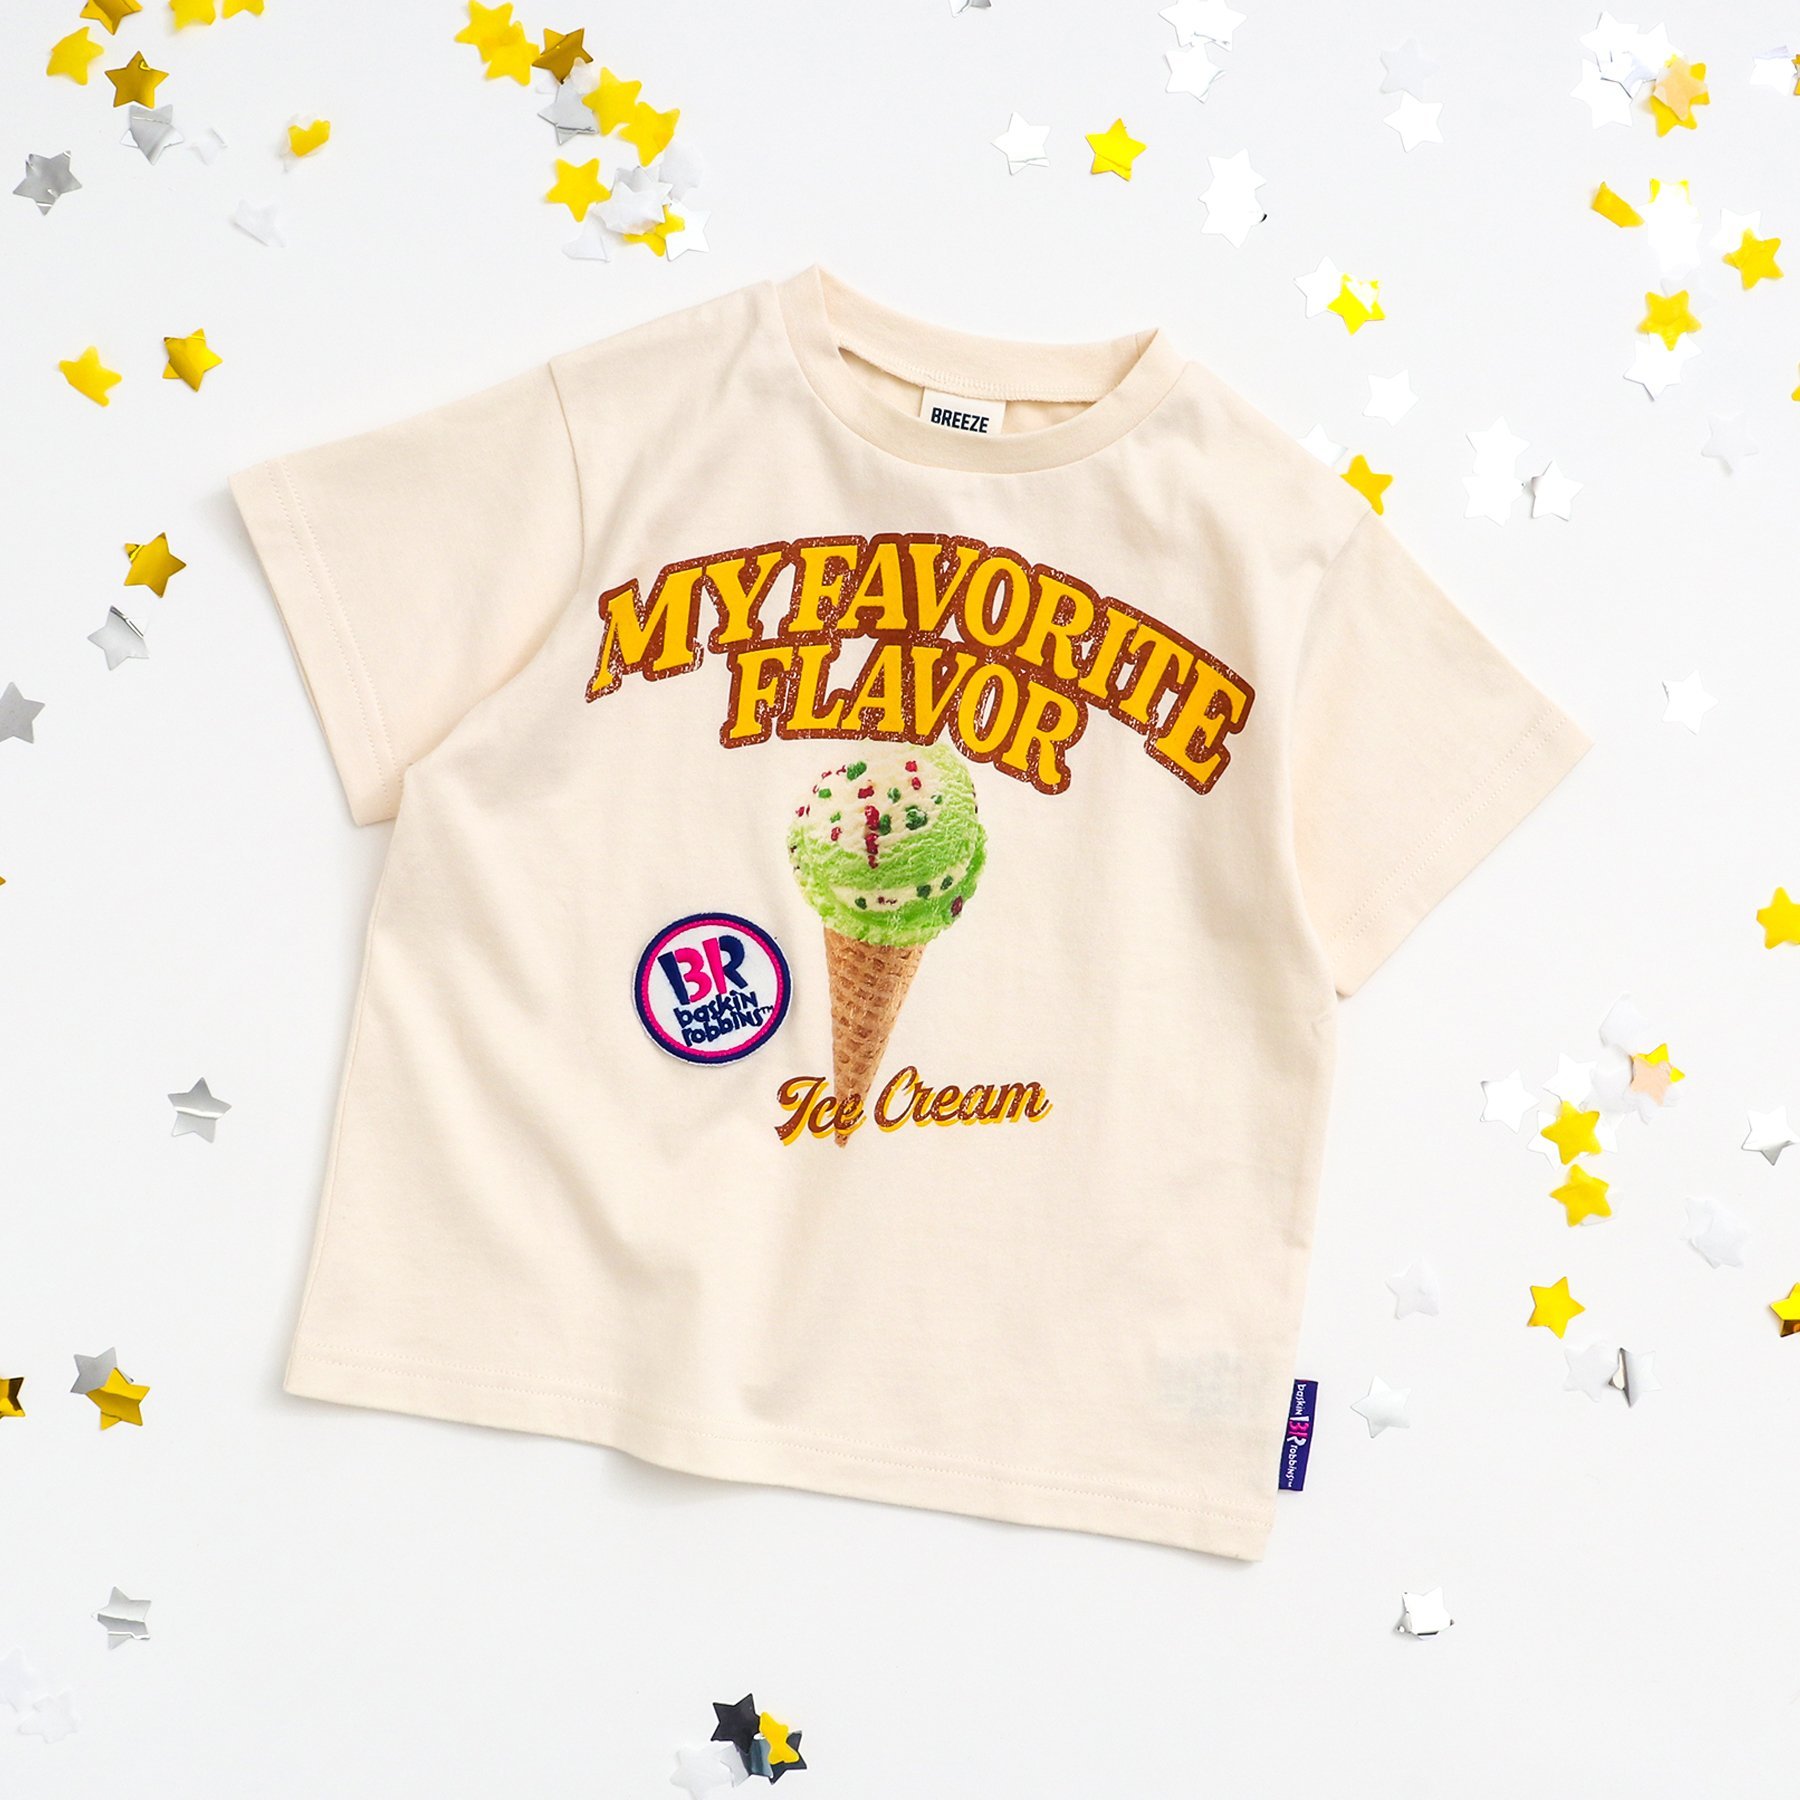 SEAL限定商品】 Ice Cream Cone Maker Party Summer Gift 長袖Tシャツ